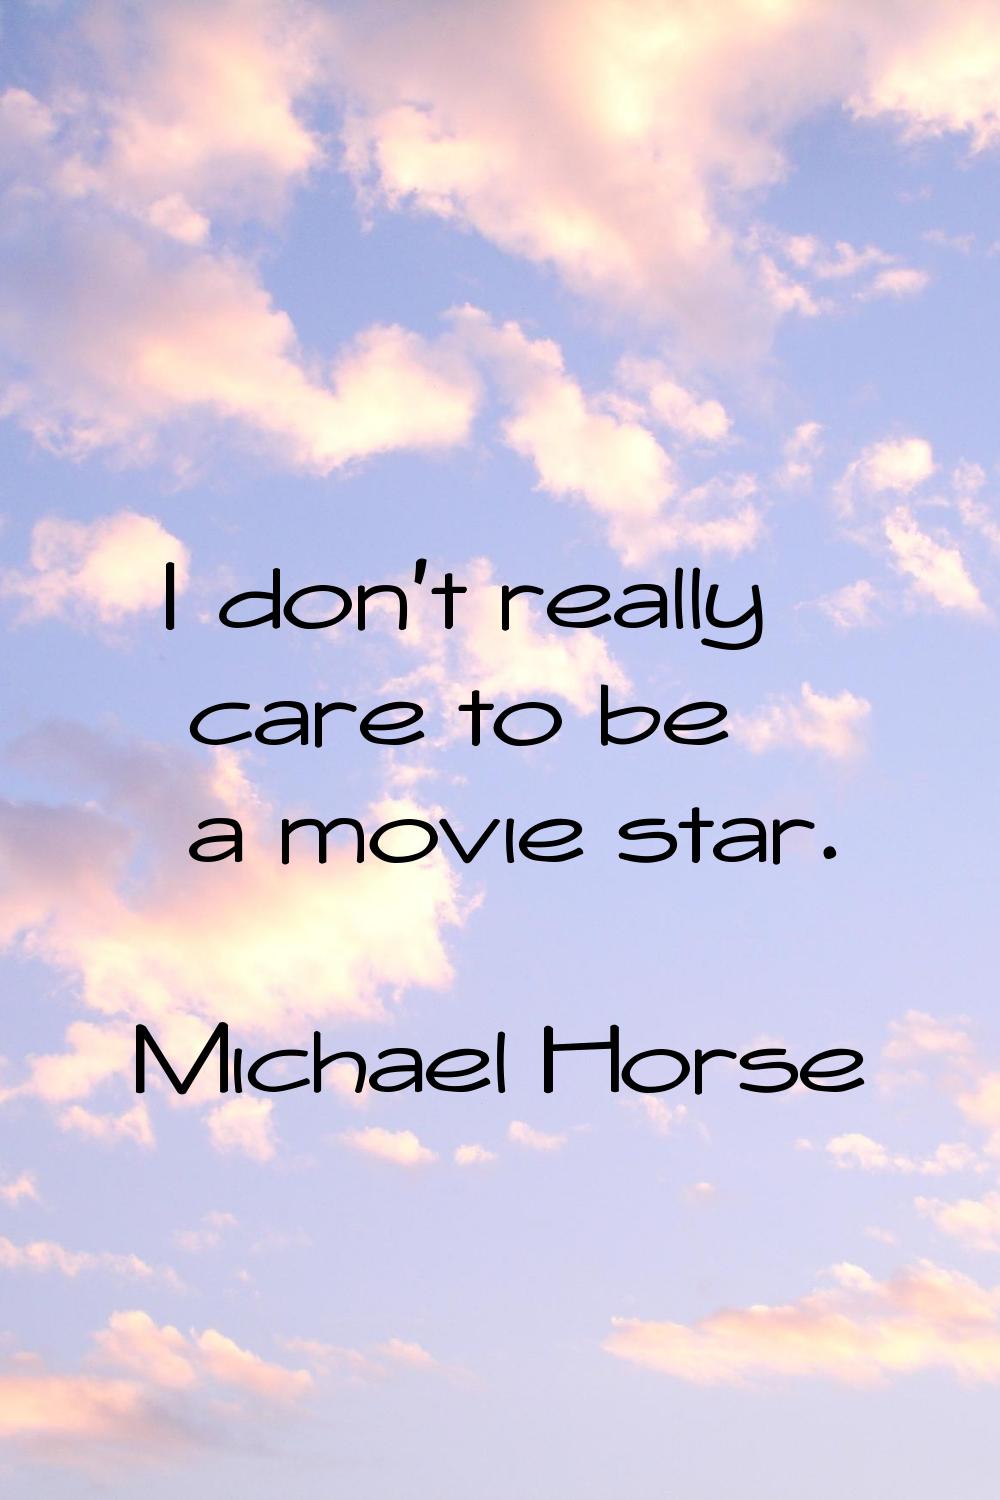 I don't really care to be a movie star.